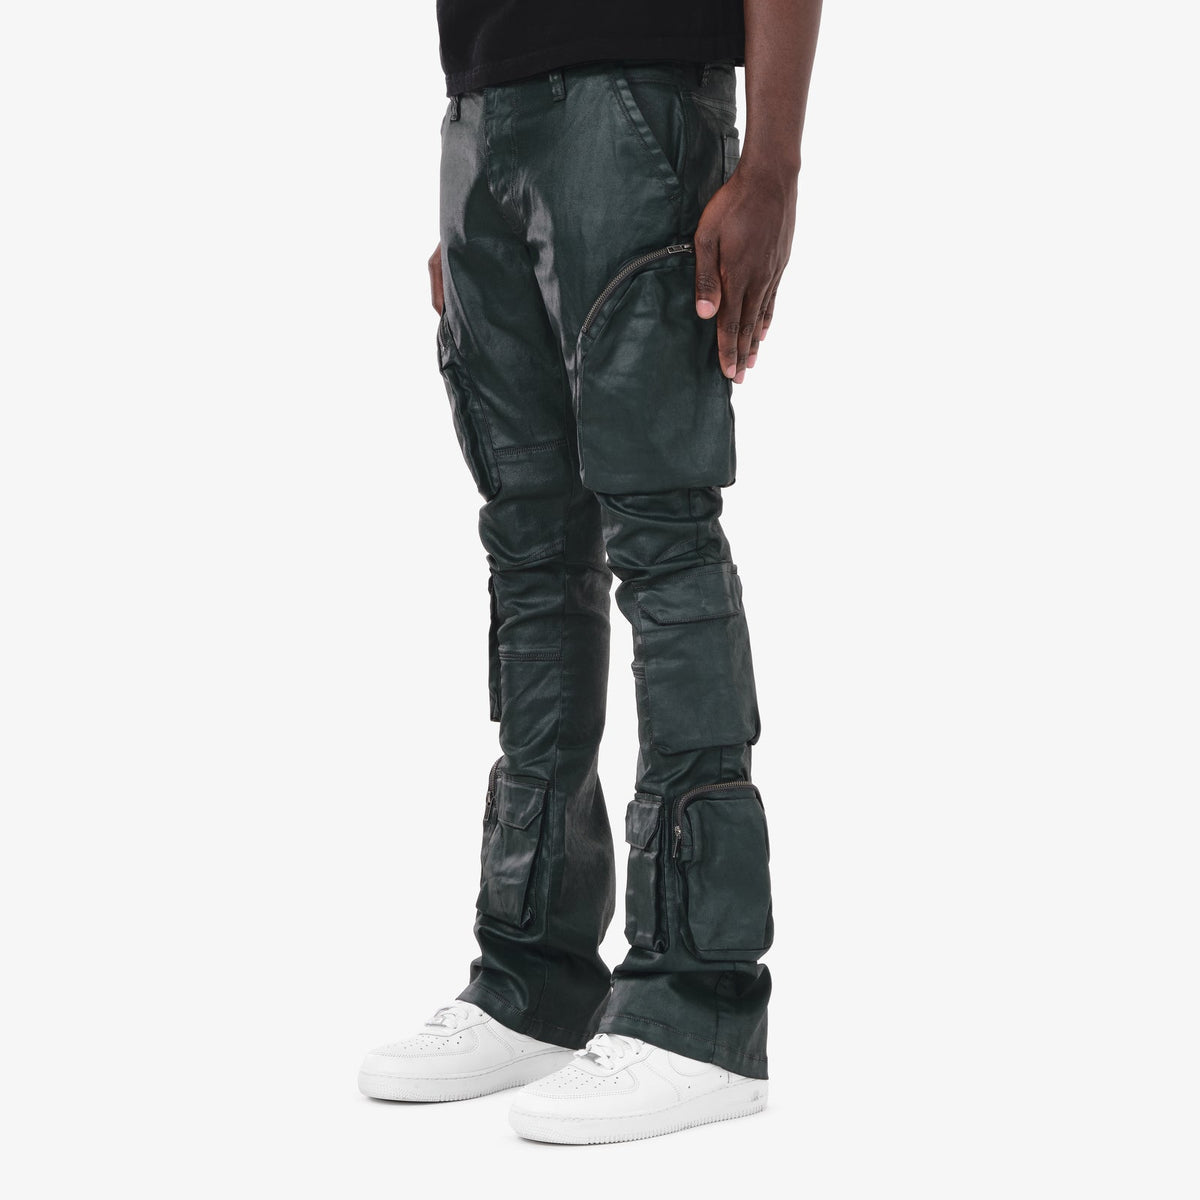 Copper Rivet Jeans - Waxed Stacked Cargo - Olive – Vengeance78